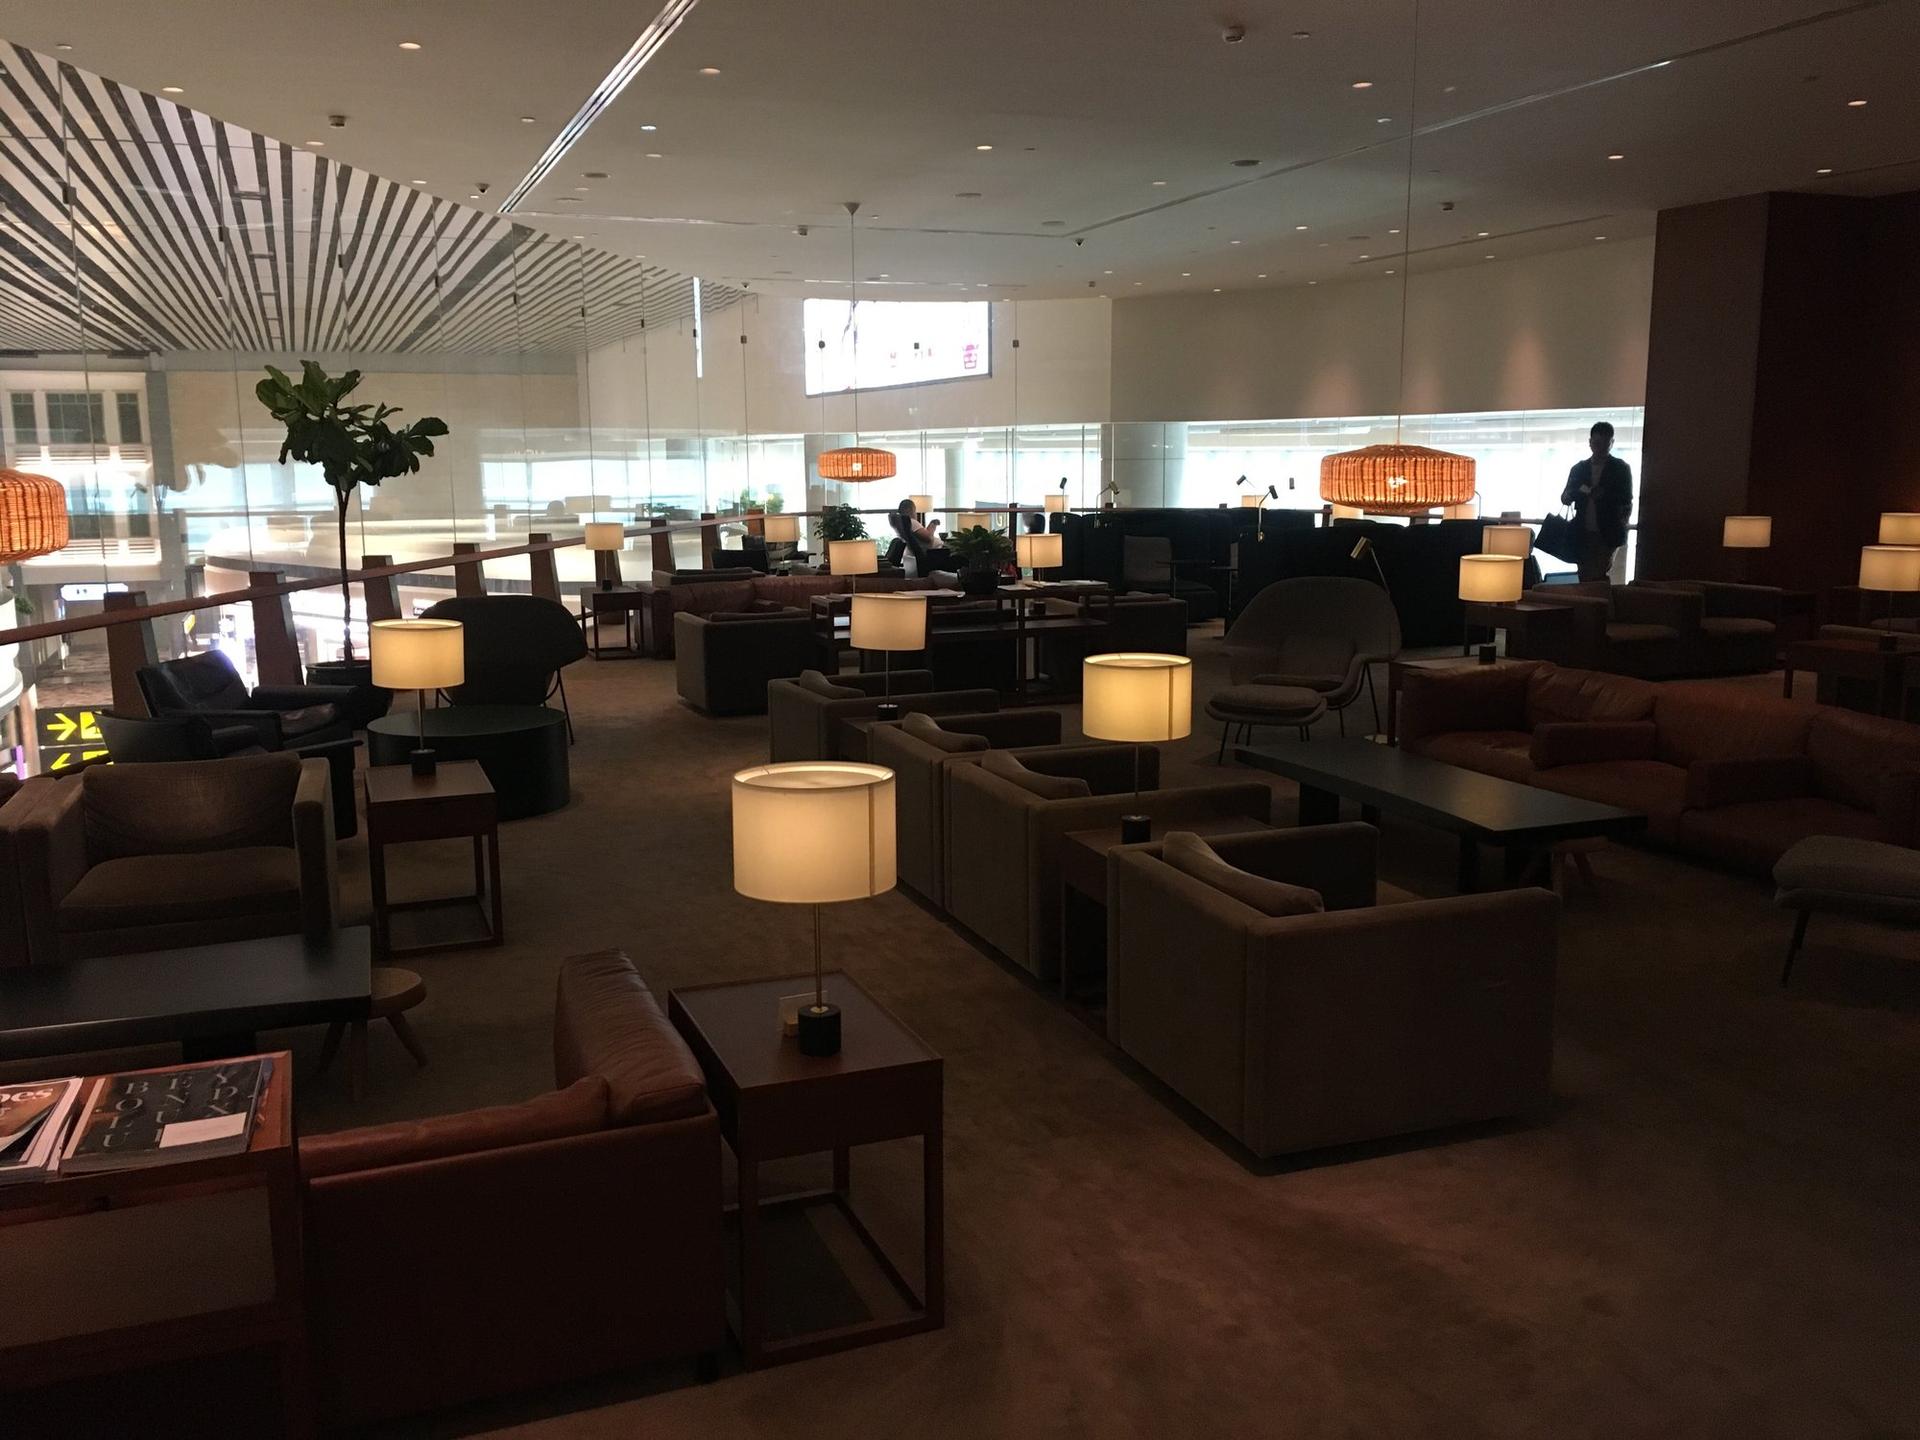 Cathay Pacific Lounge image 32 of 60